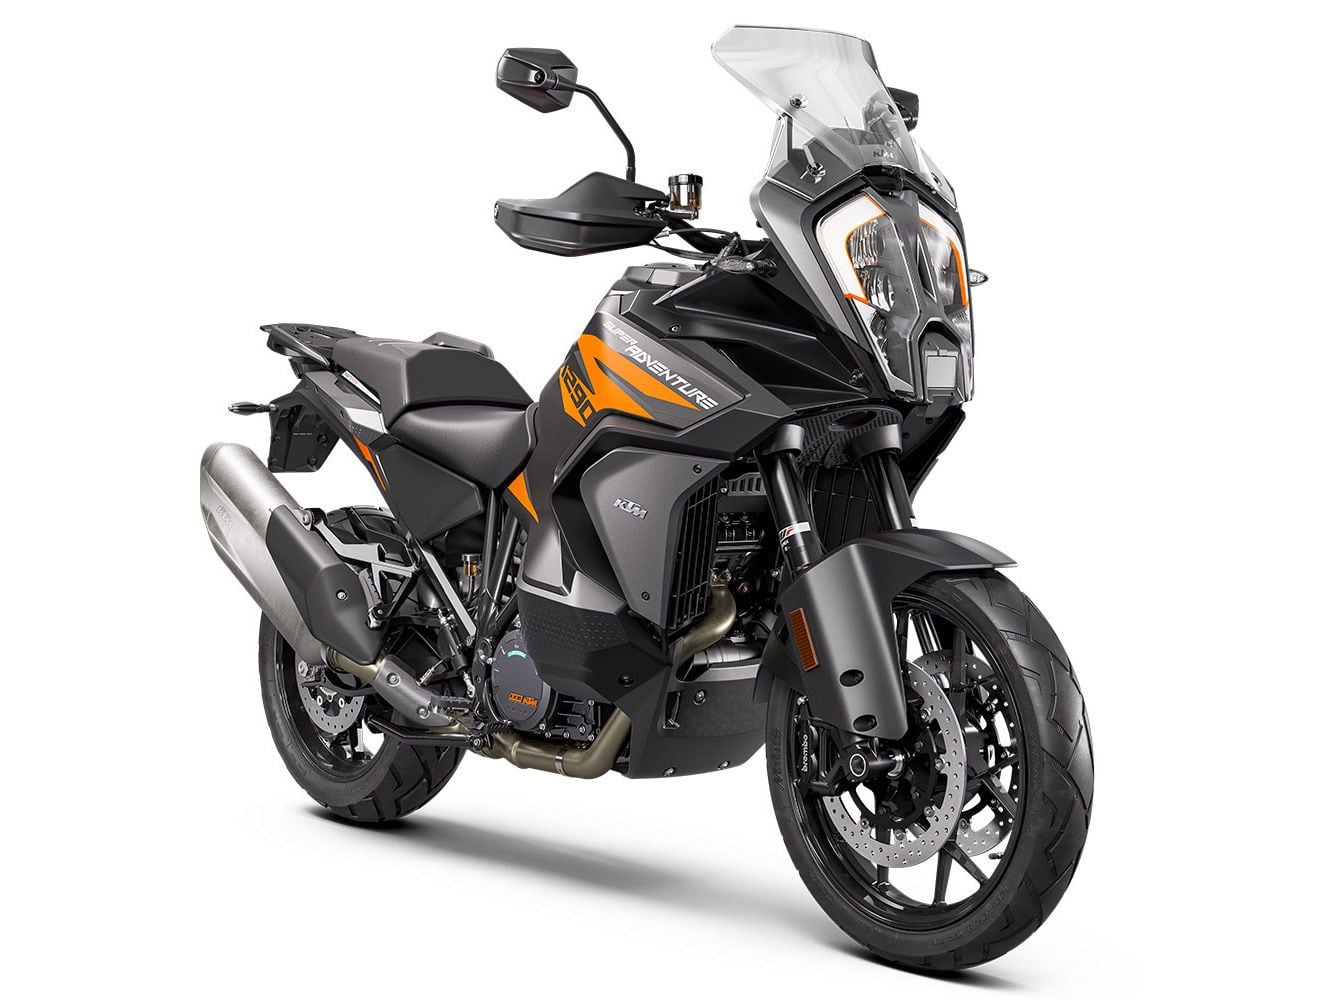 KTM’s officially bringing the 1290 Adventure S stateside for the 2022 model year. International model shown.